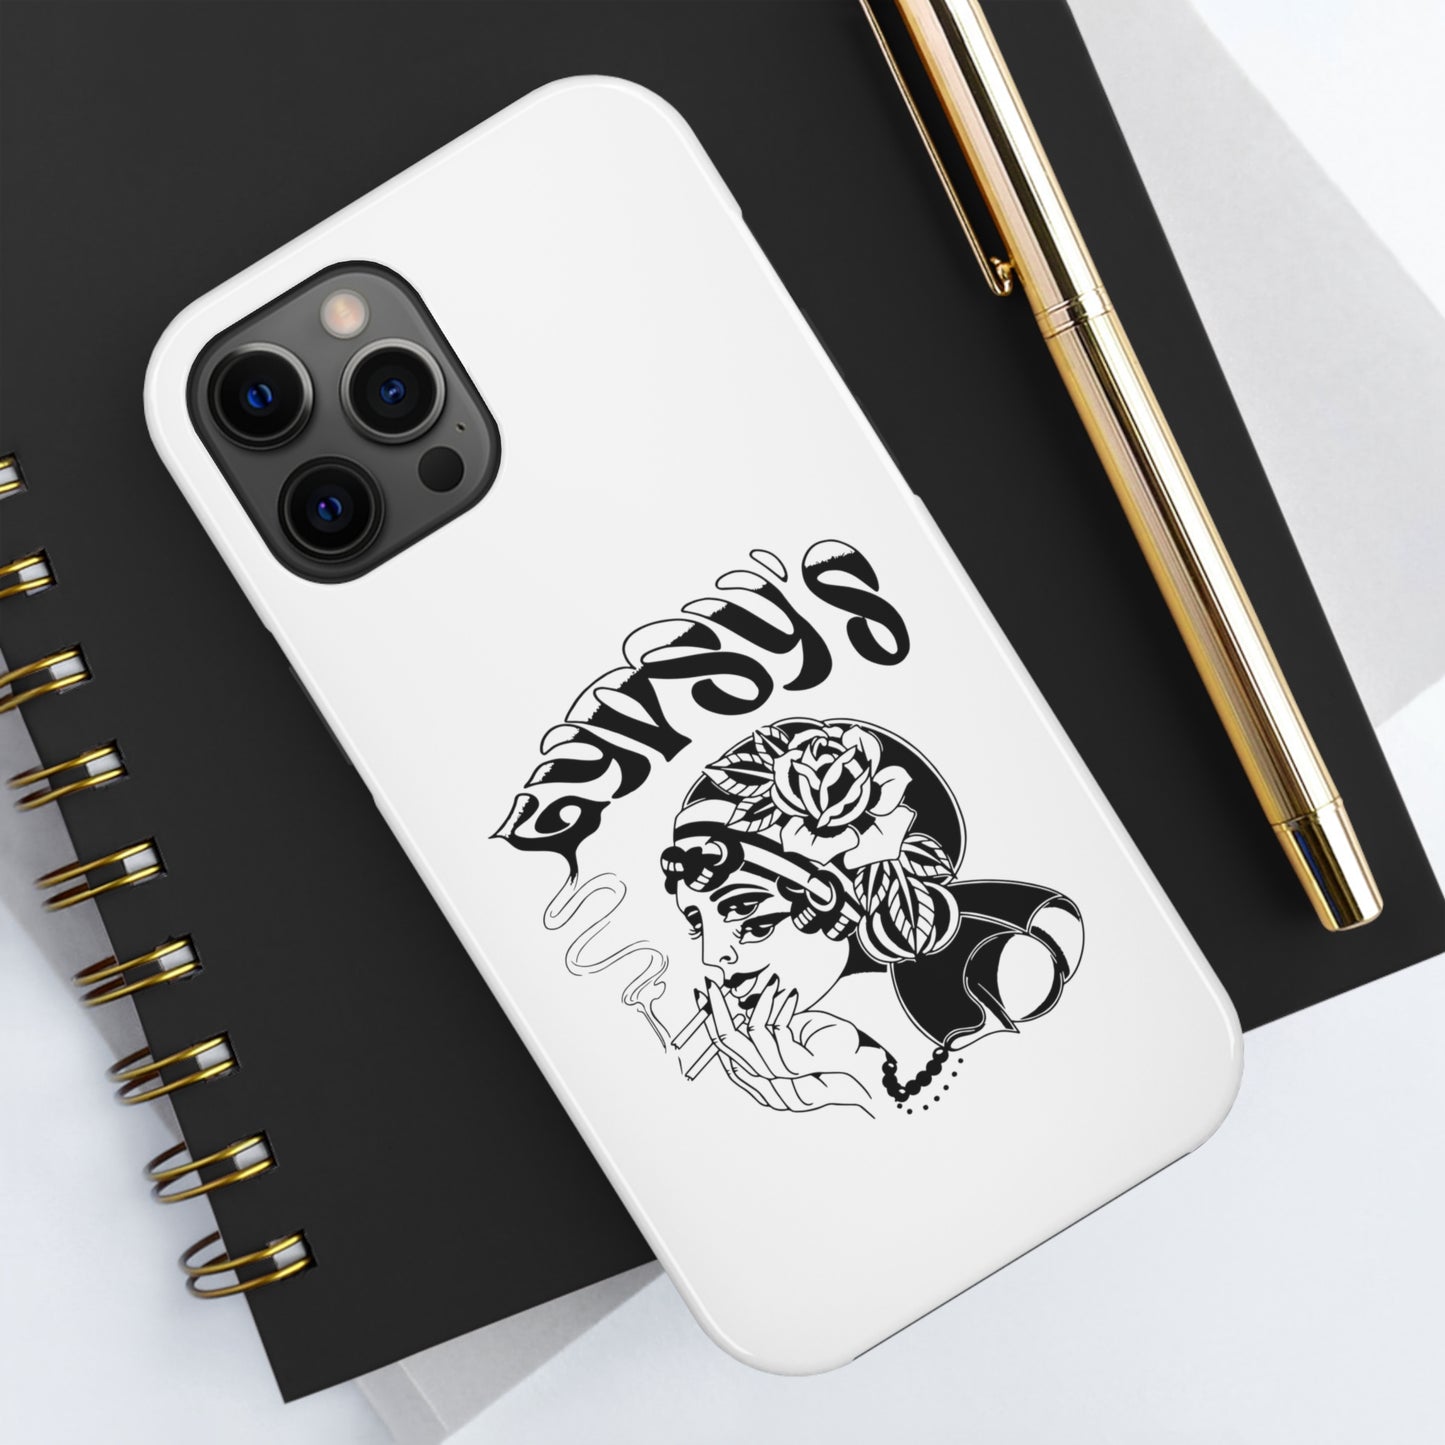 White Tough Phone Cases | Gypsy's Double Gypsy Lady (by @ohbhave)